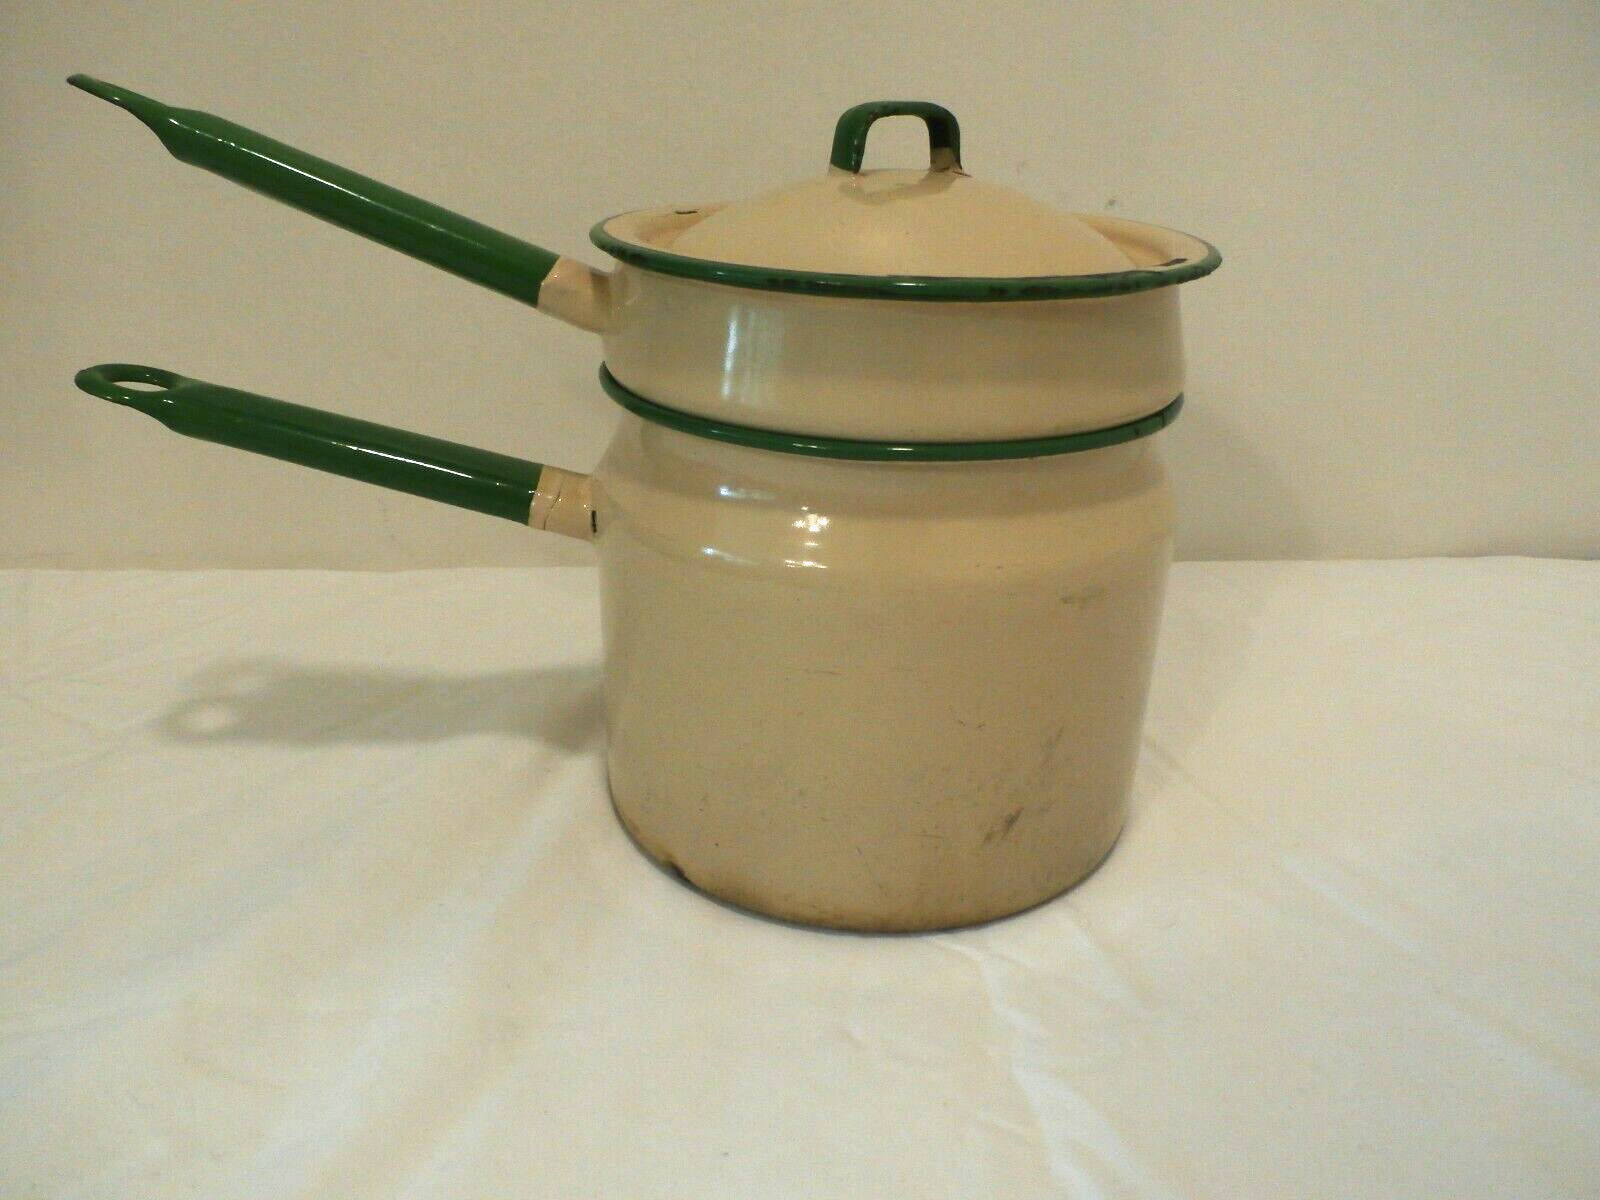 Vintage Green and Cream Enamelware Double Boiler Stains & Rust